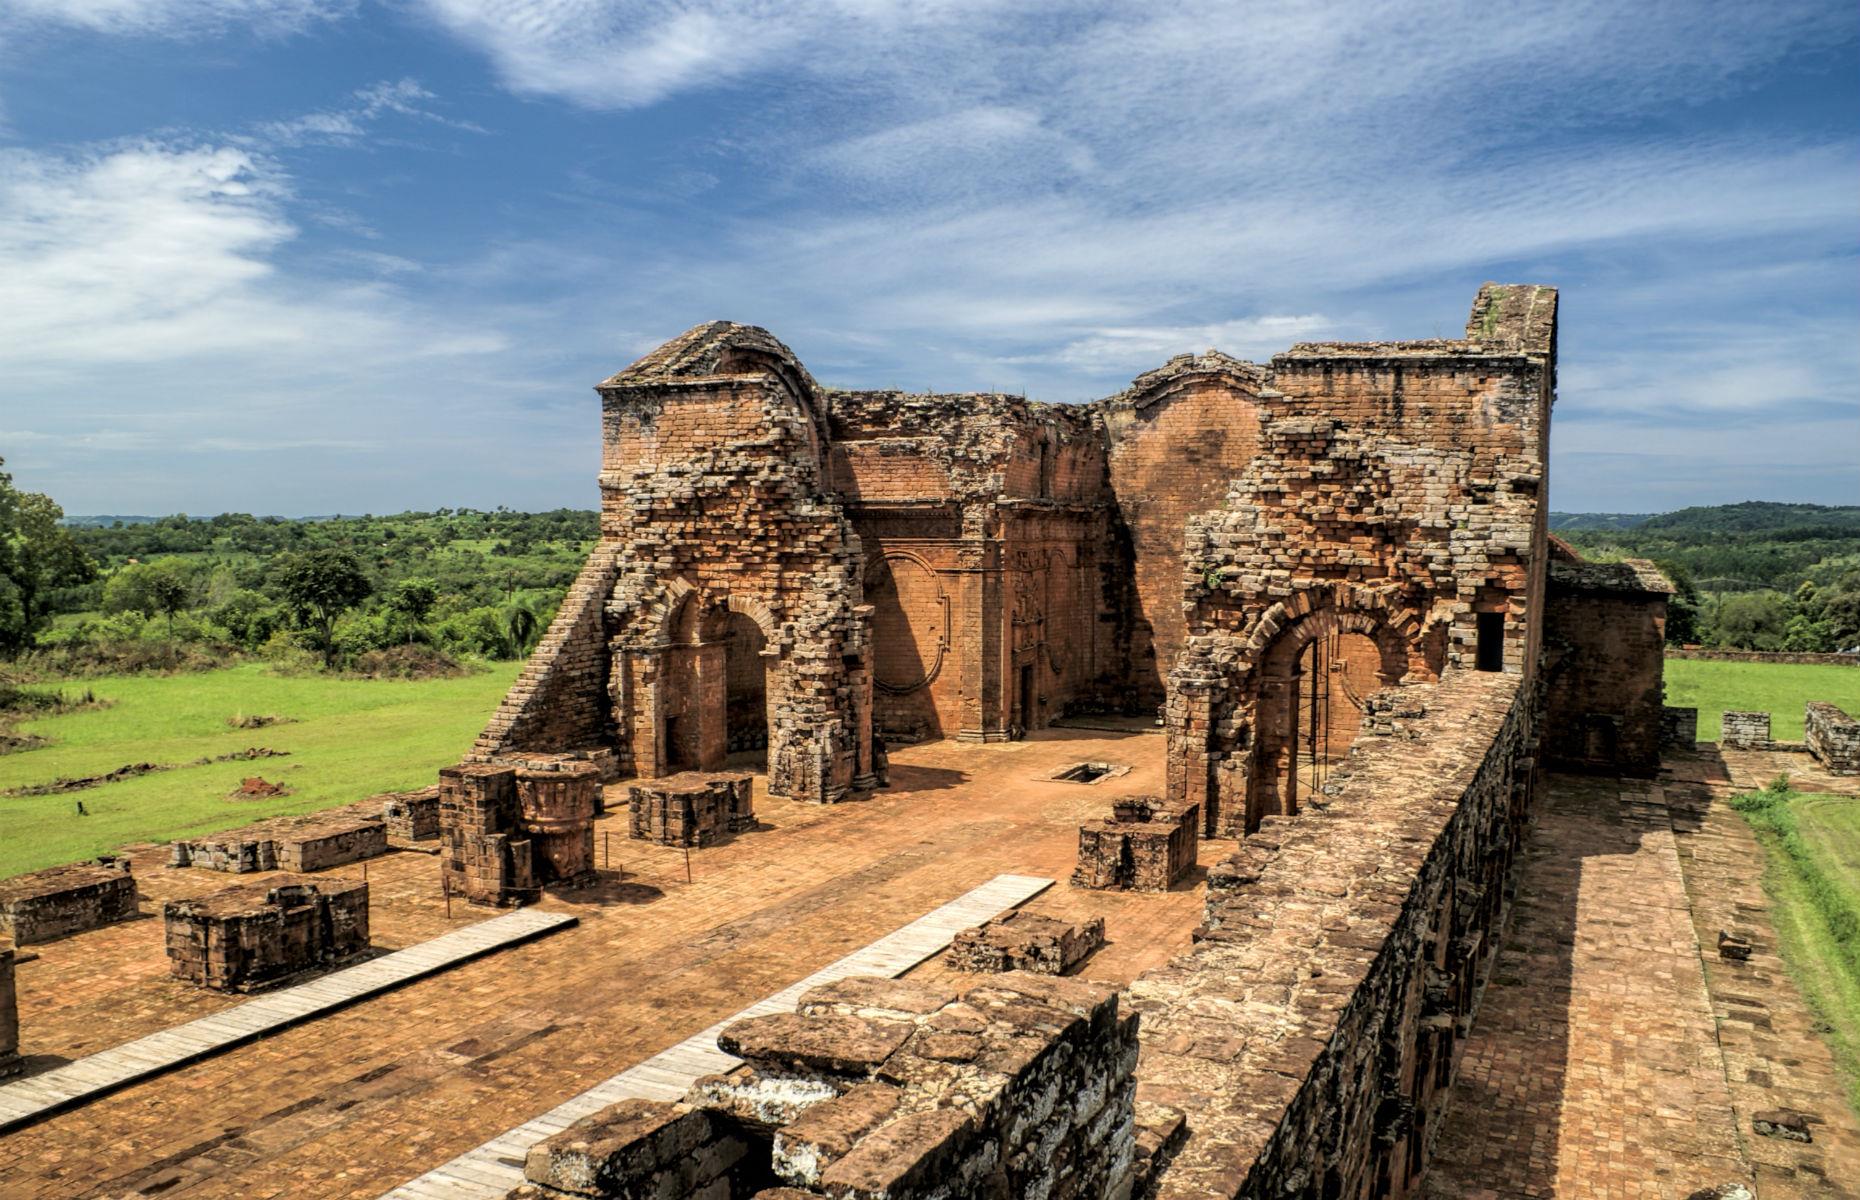 <p>Paraguay is home to two sprawling UNESCO World Heritage-listed Jesuit missions: La Santisima Trinidad de Parana and Jesus de Tavarangue, established by the Society of Jesus during the 17th and 18th centuries. Located six miles apart, the quiet archaeological ruins can be explored in a relatively crowd-free setting.</p>